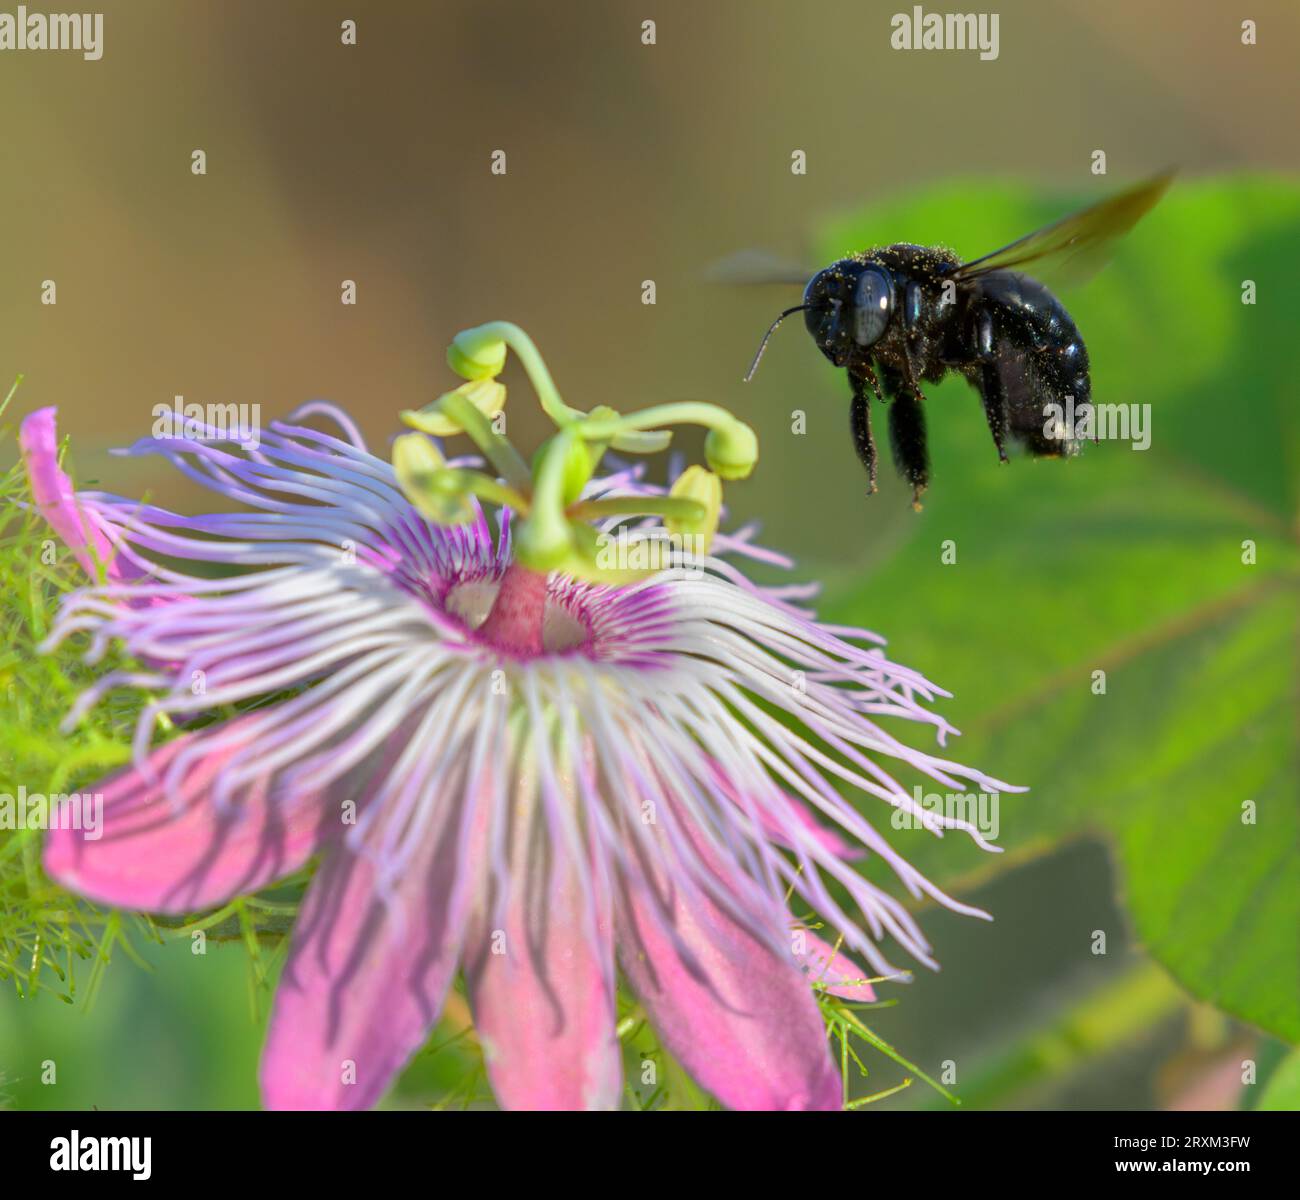 Female southern carpenter bee (Xylocopa micans) approaching flower of the stinking passion flower (Passiflora foetida), Galveston, Texas, USA. Stock Photo